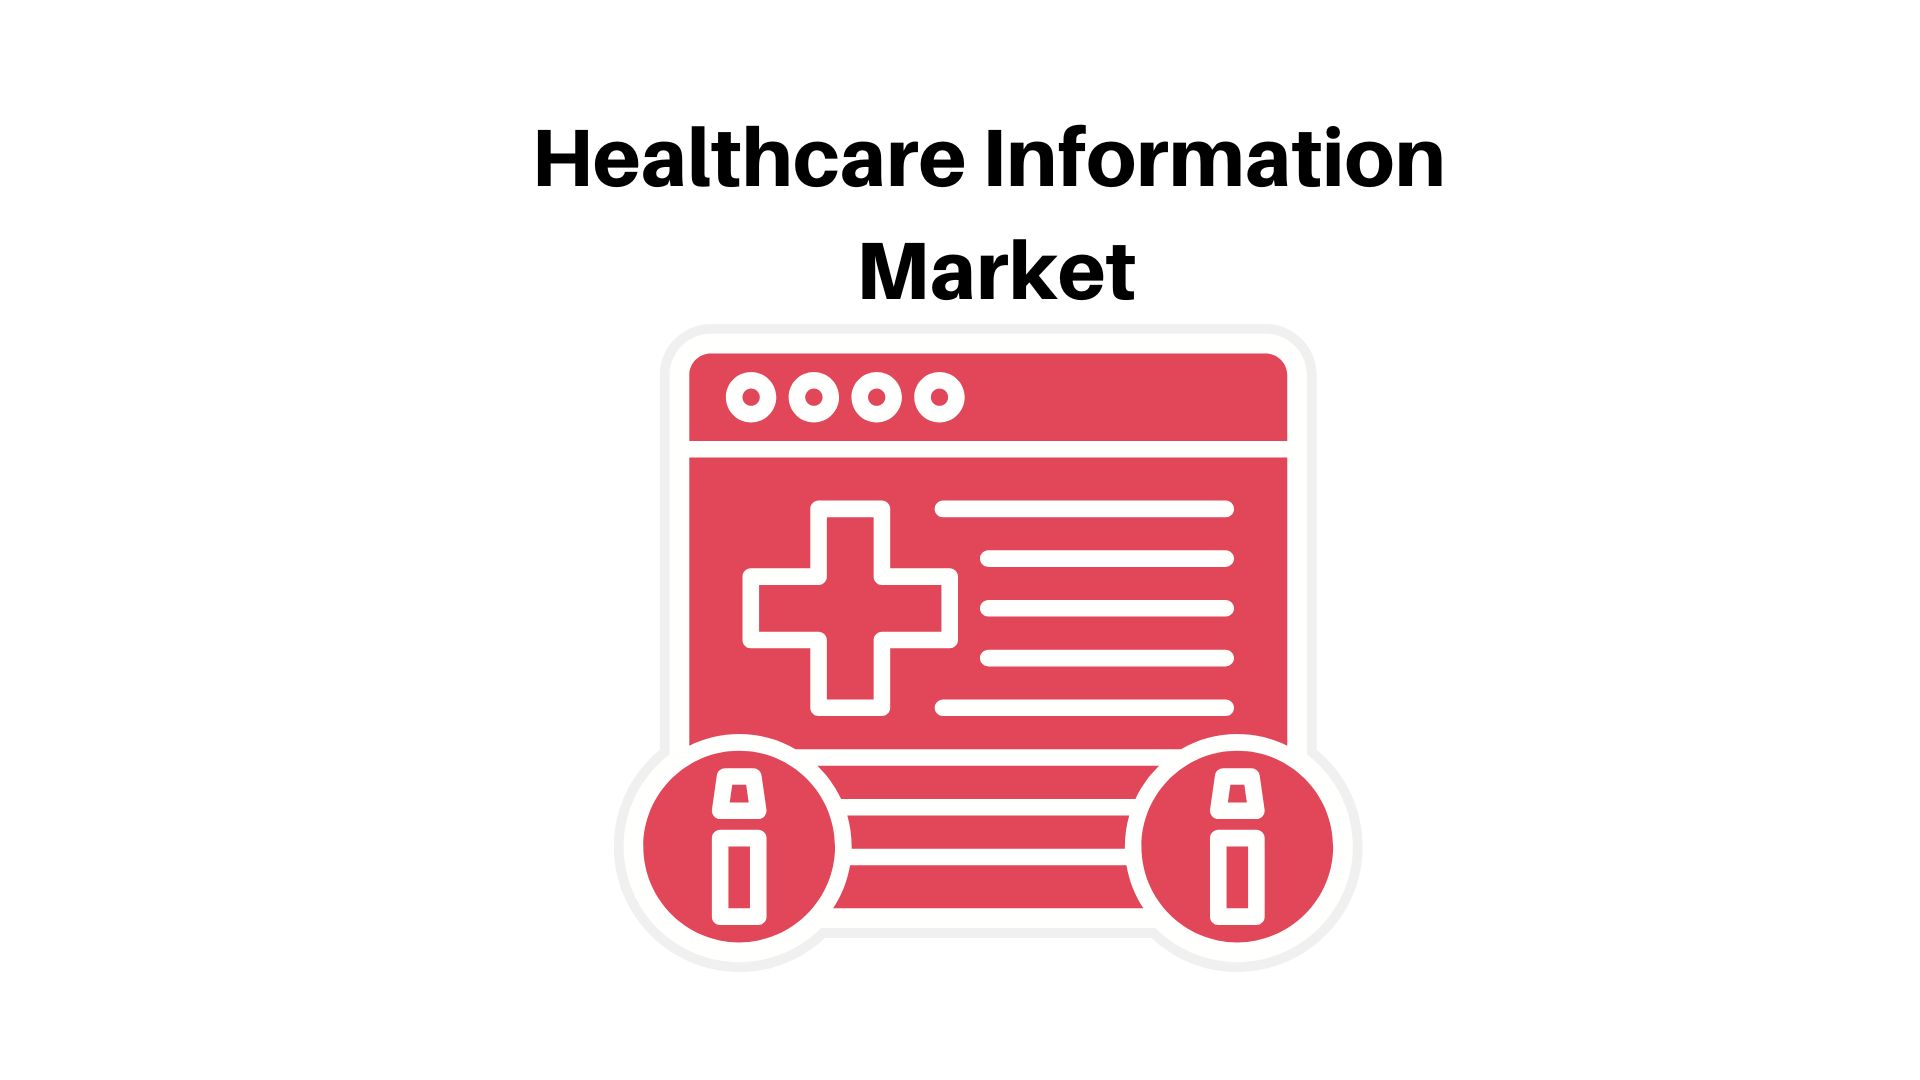 Healthcare Information Systems Market To Develop Strongly And Cross USD 1,161.5 Billion By 2032